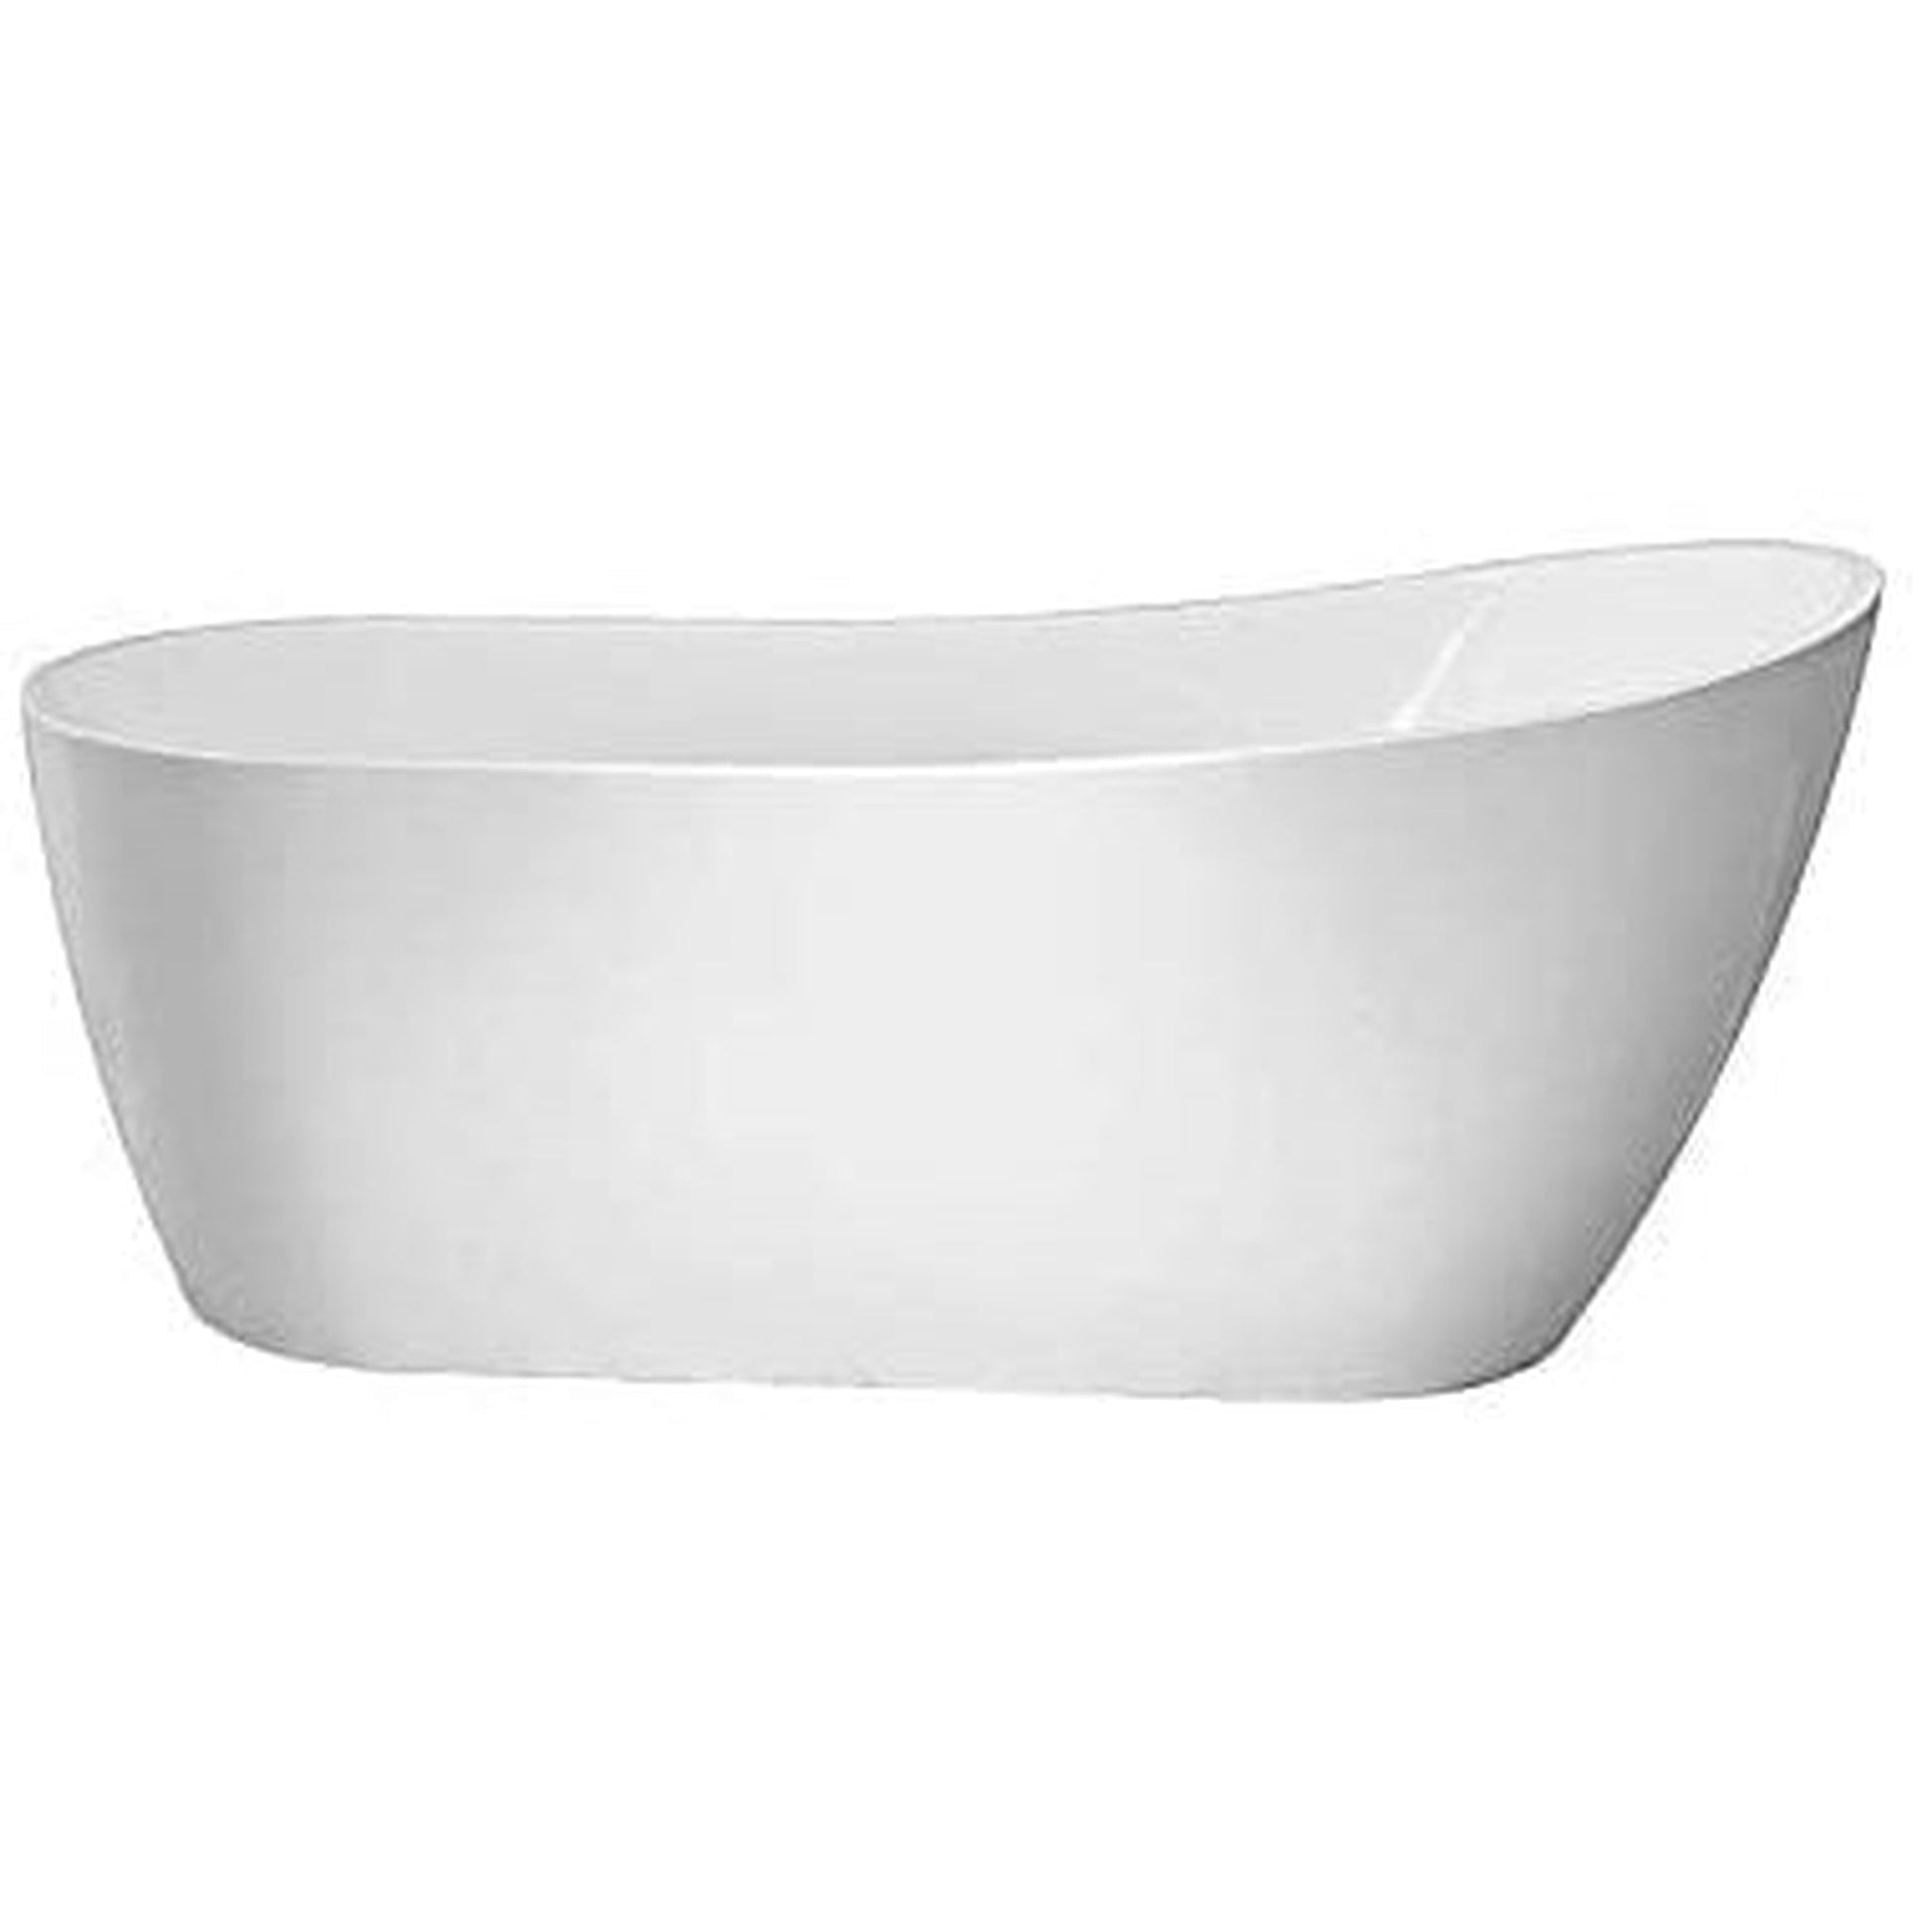 Vanity Art VA6904-L 67" White Acrylic Modern Stand Alone Soaking Tub With Polished Chrome Slotted Overflow and Pop-up Drain